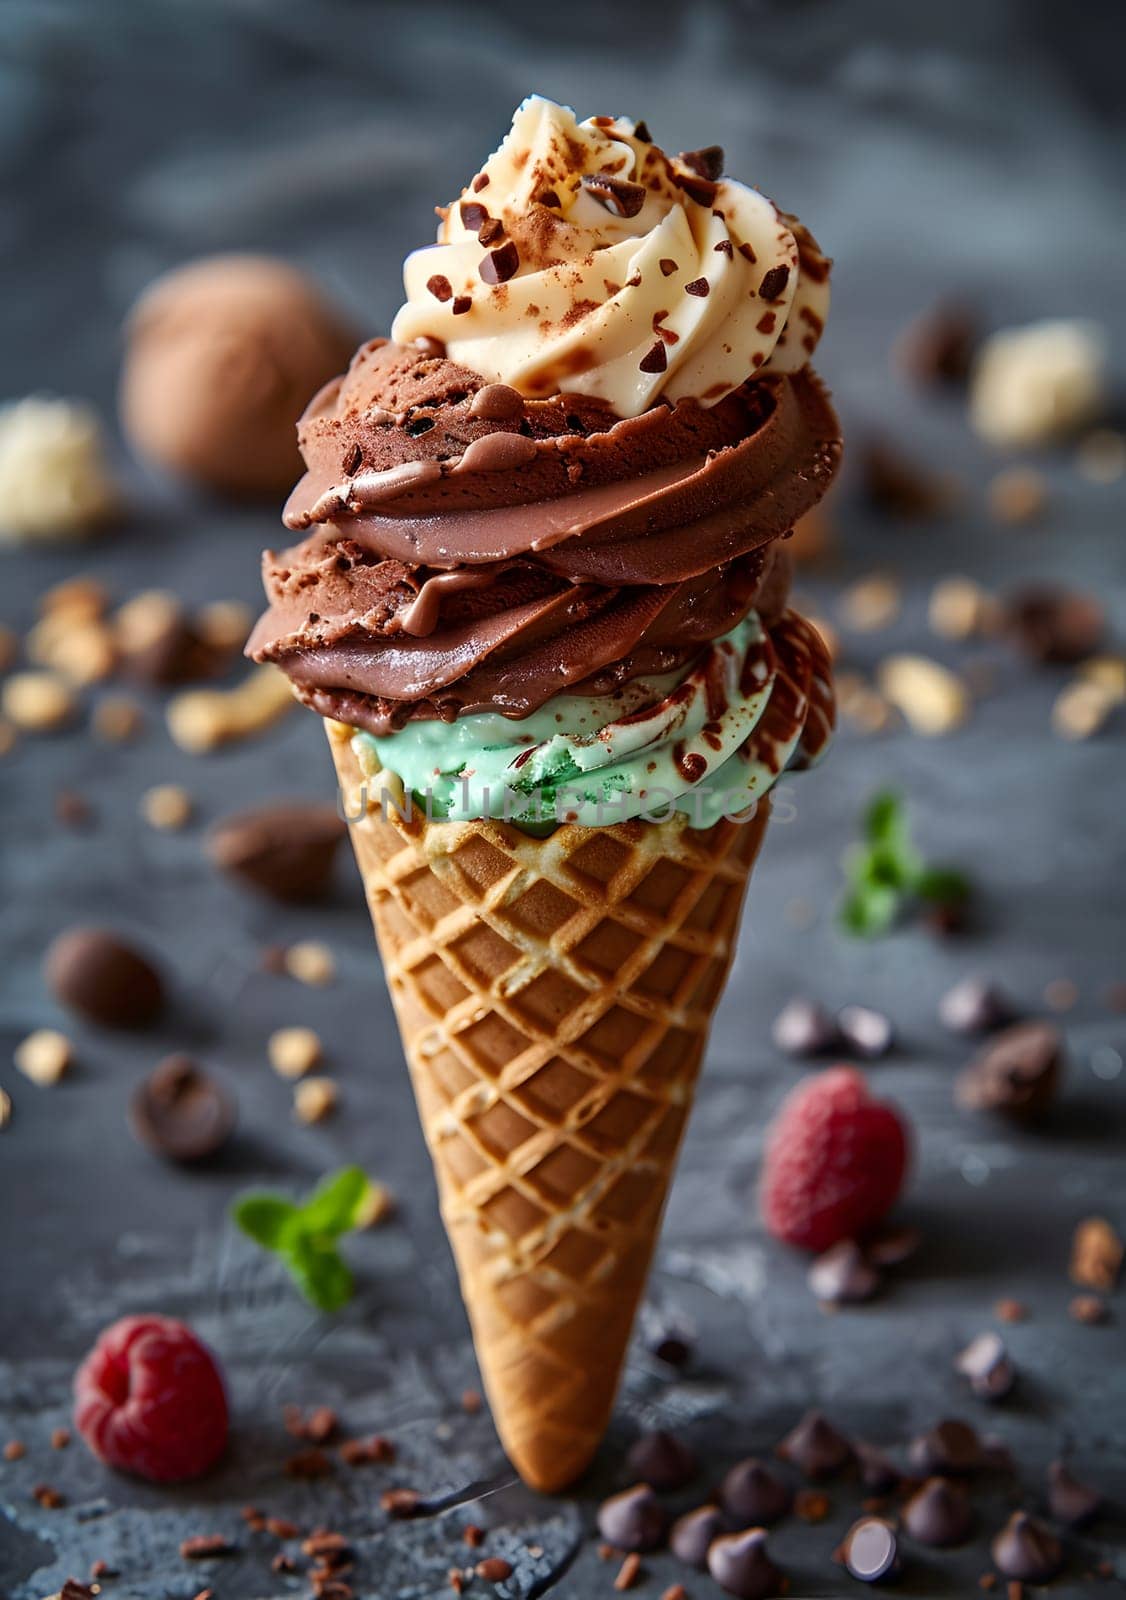 A delectable ice cream cone showcasing three unique flavors of frozen dessert, displayed on a table with natural foods ingredients